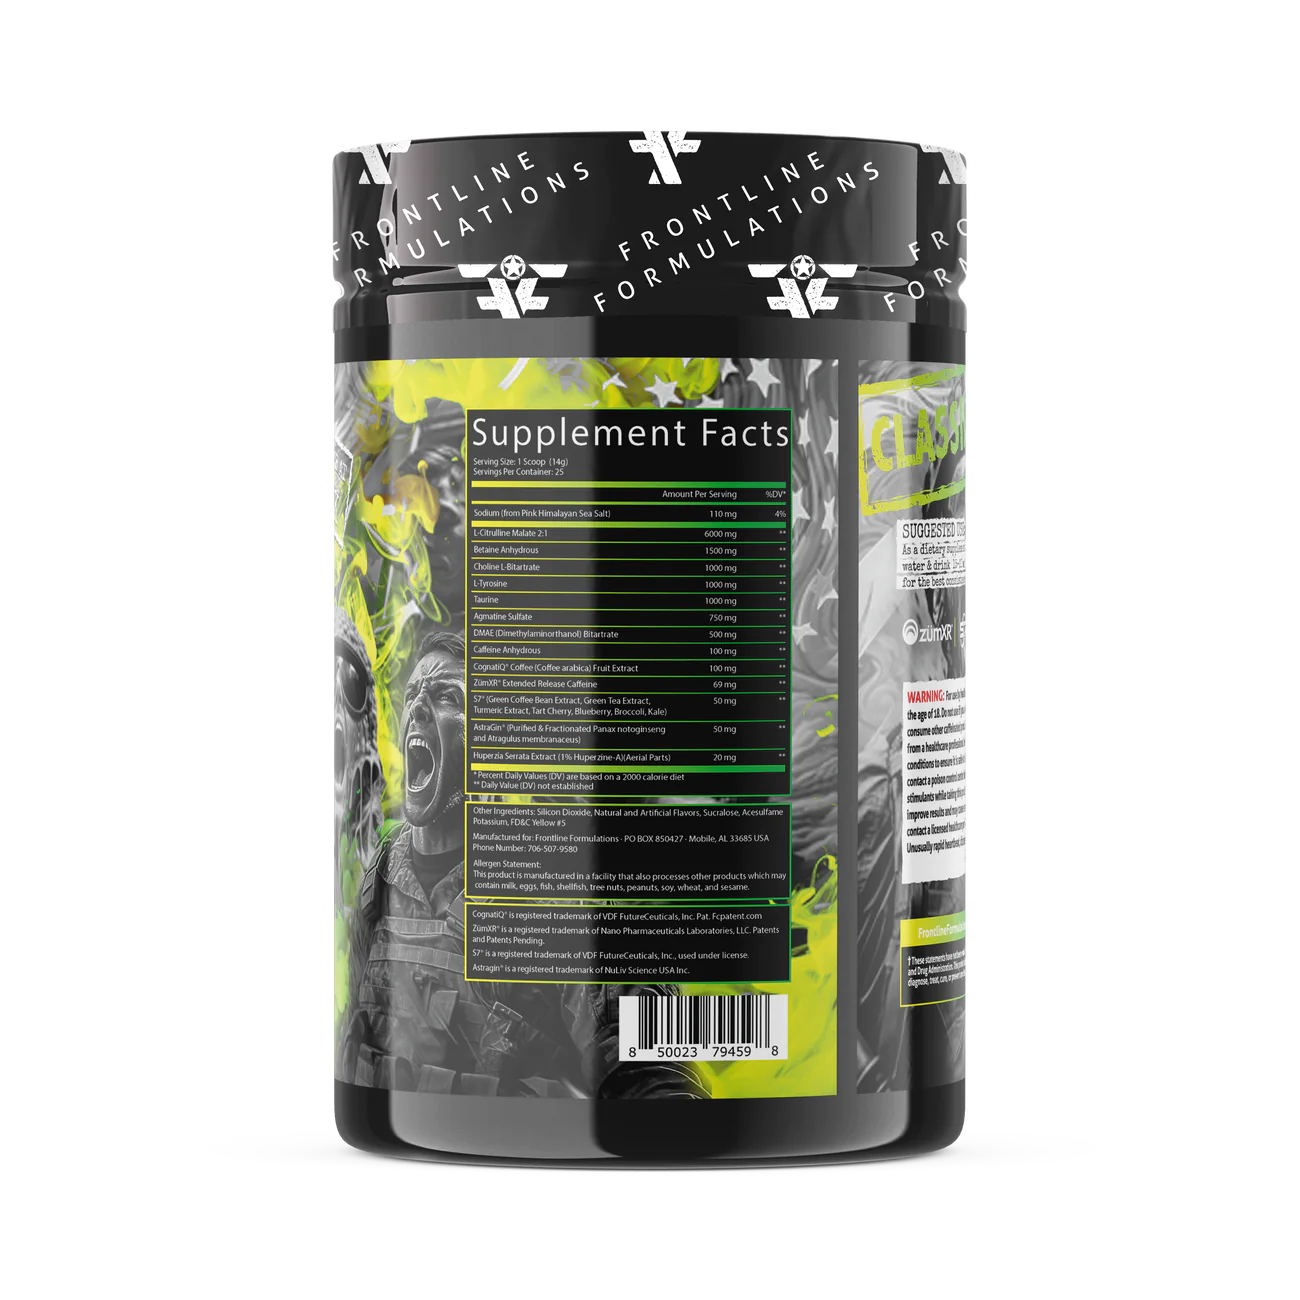 Operation Delirium Pumpmax Creamax Stack Operation Delirium Introducing Operation Delirium, the cutting-edge preworkout designed for warriors seeking an unparalleled boost in performance and focus. This military-grade experimental formula combines the pow